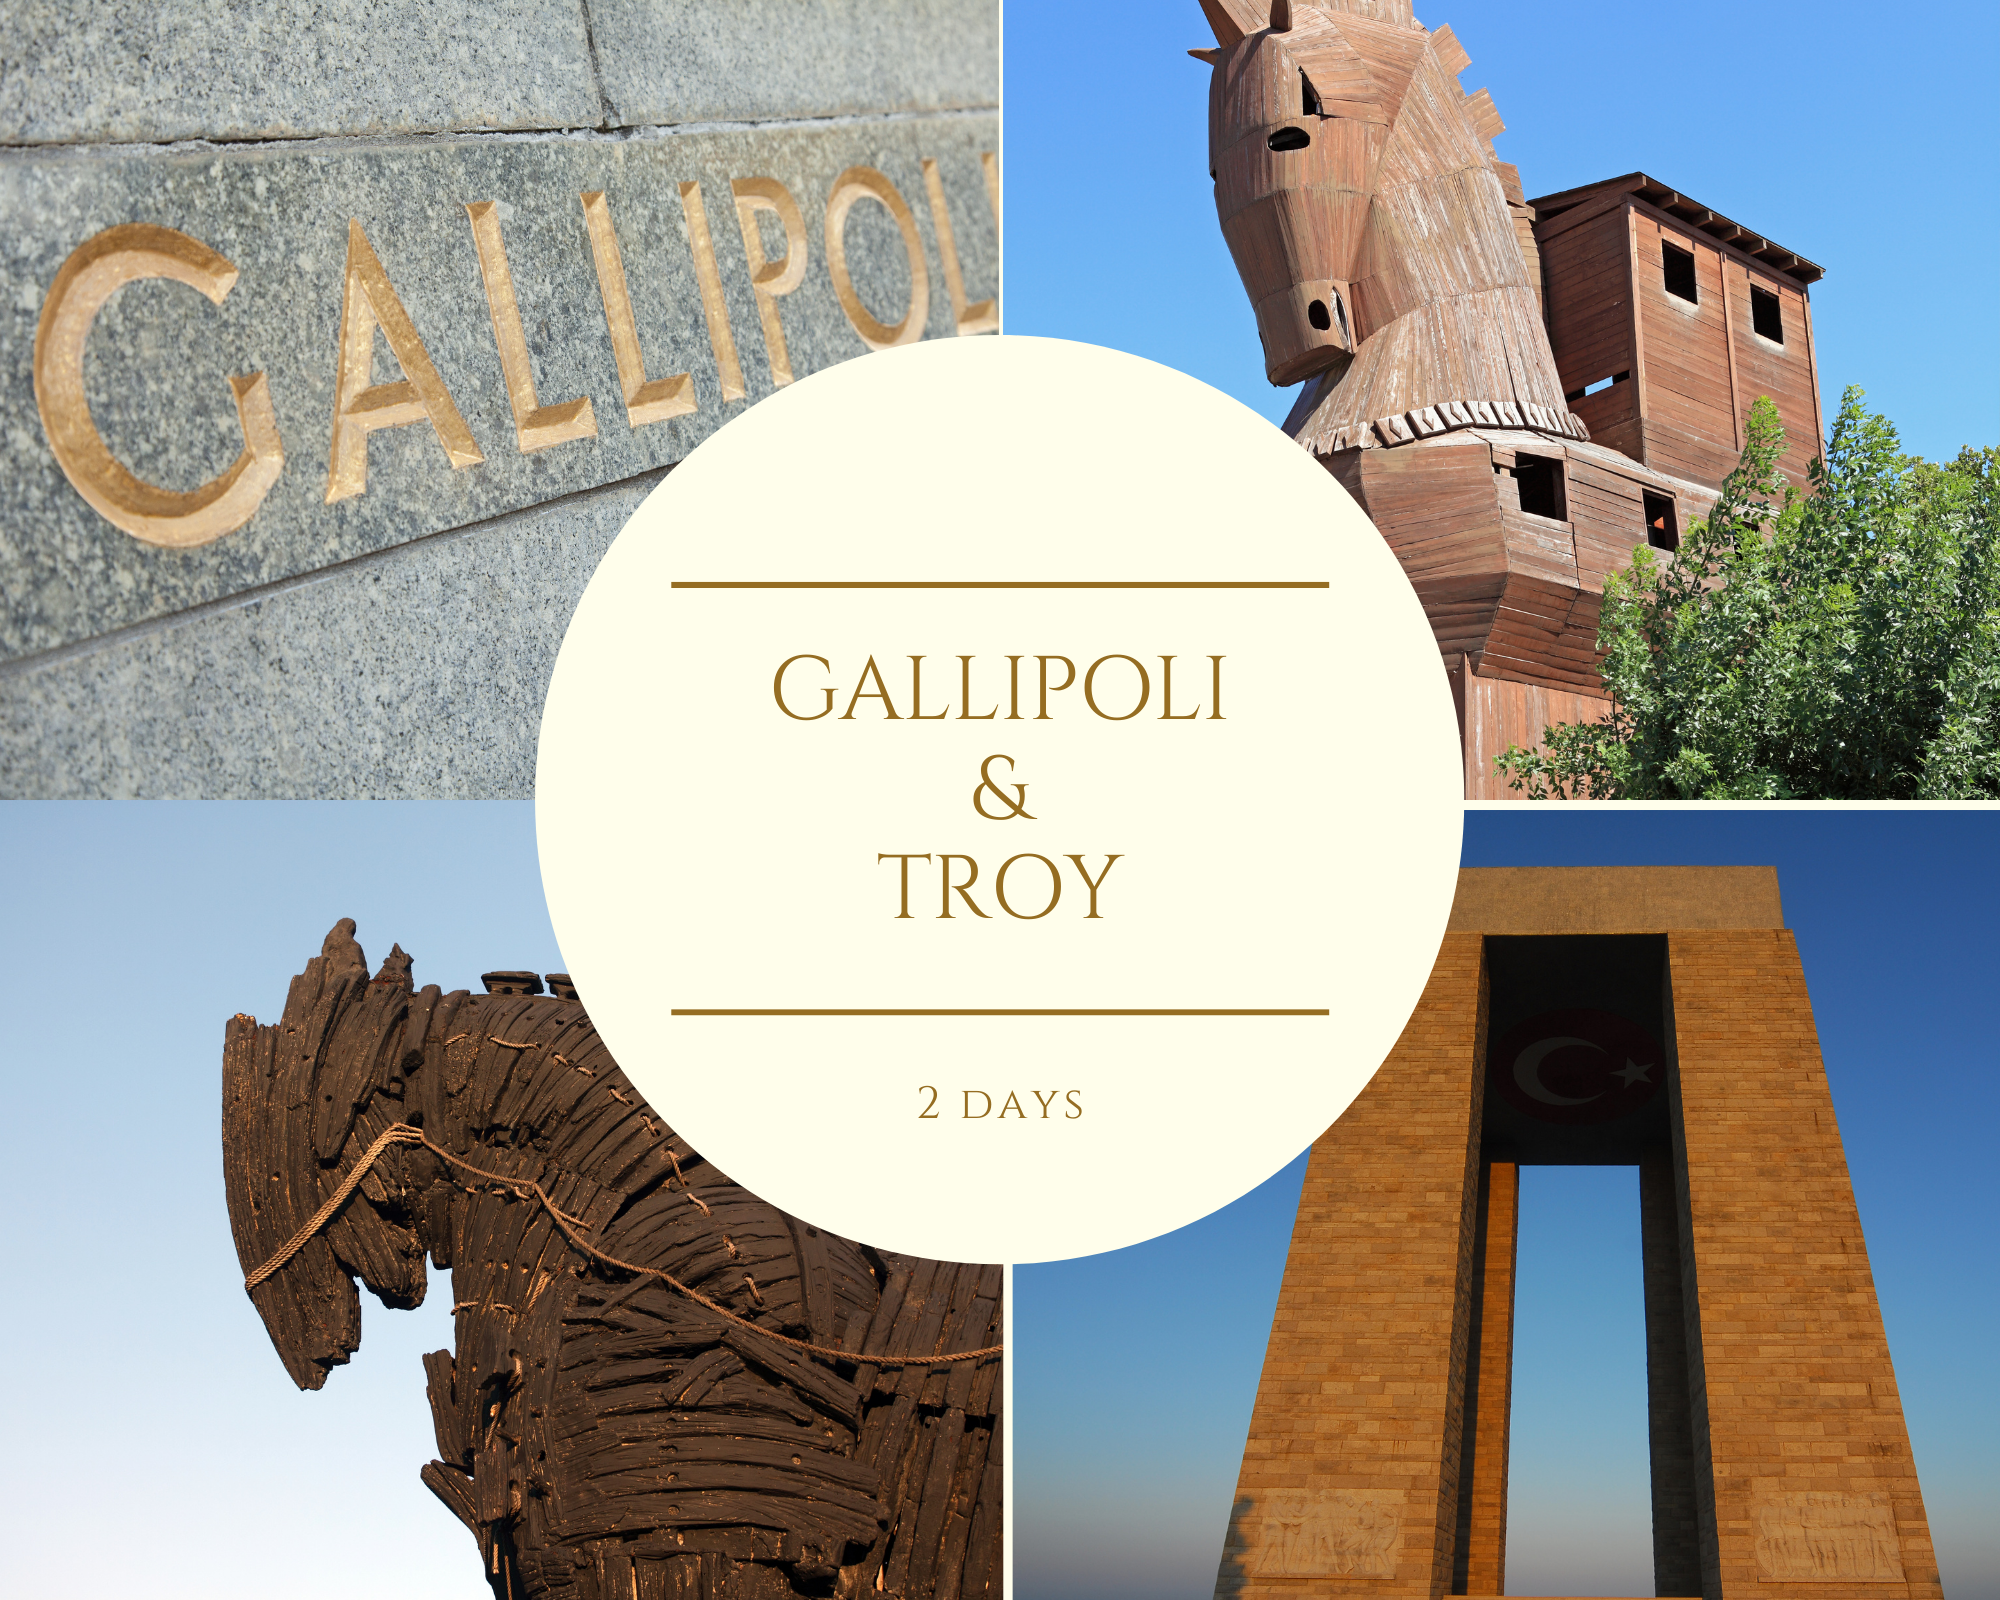 Gallipoli and Troy 2 Days by Bus